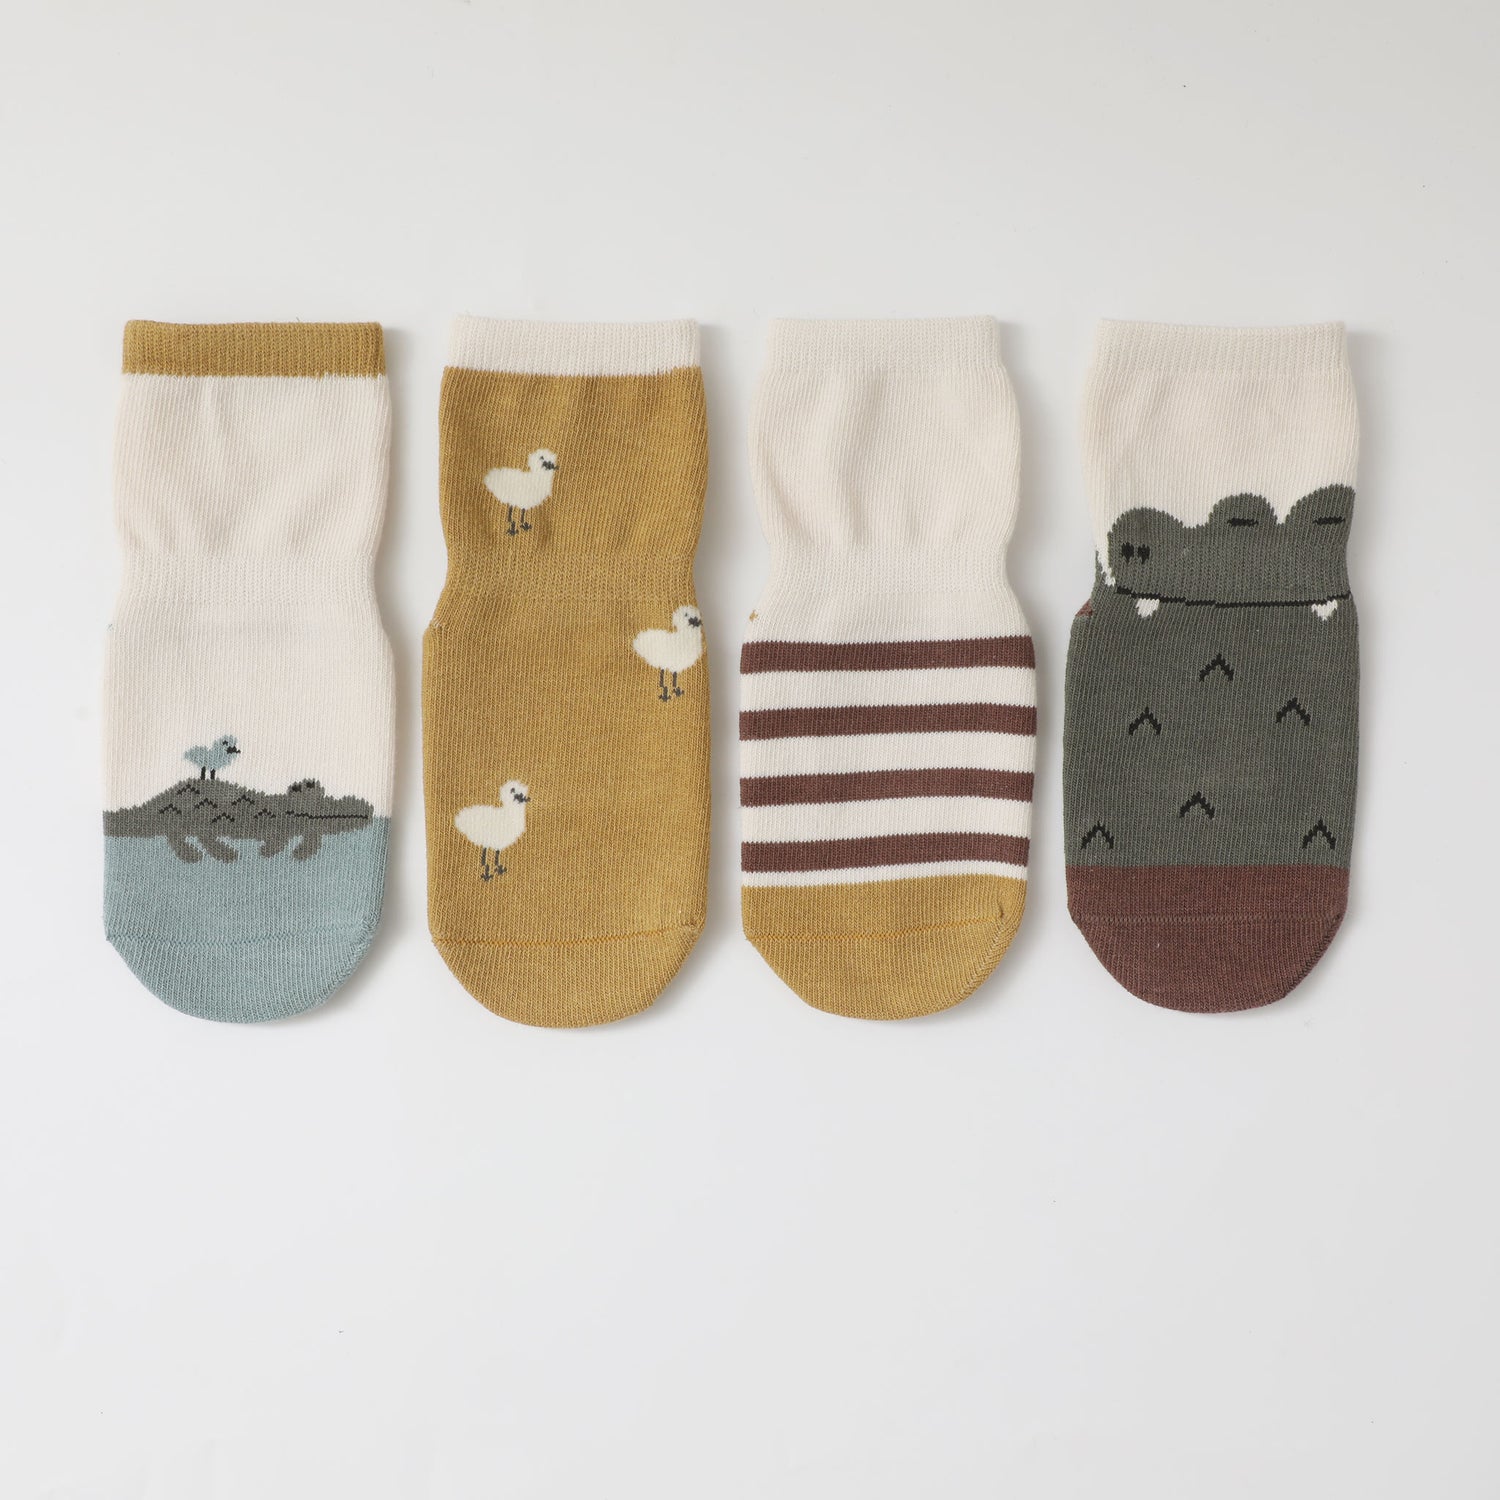 Toddler grip socks with extra stretch for growing feet